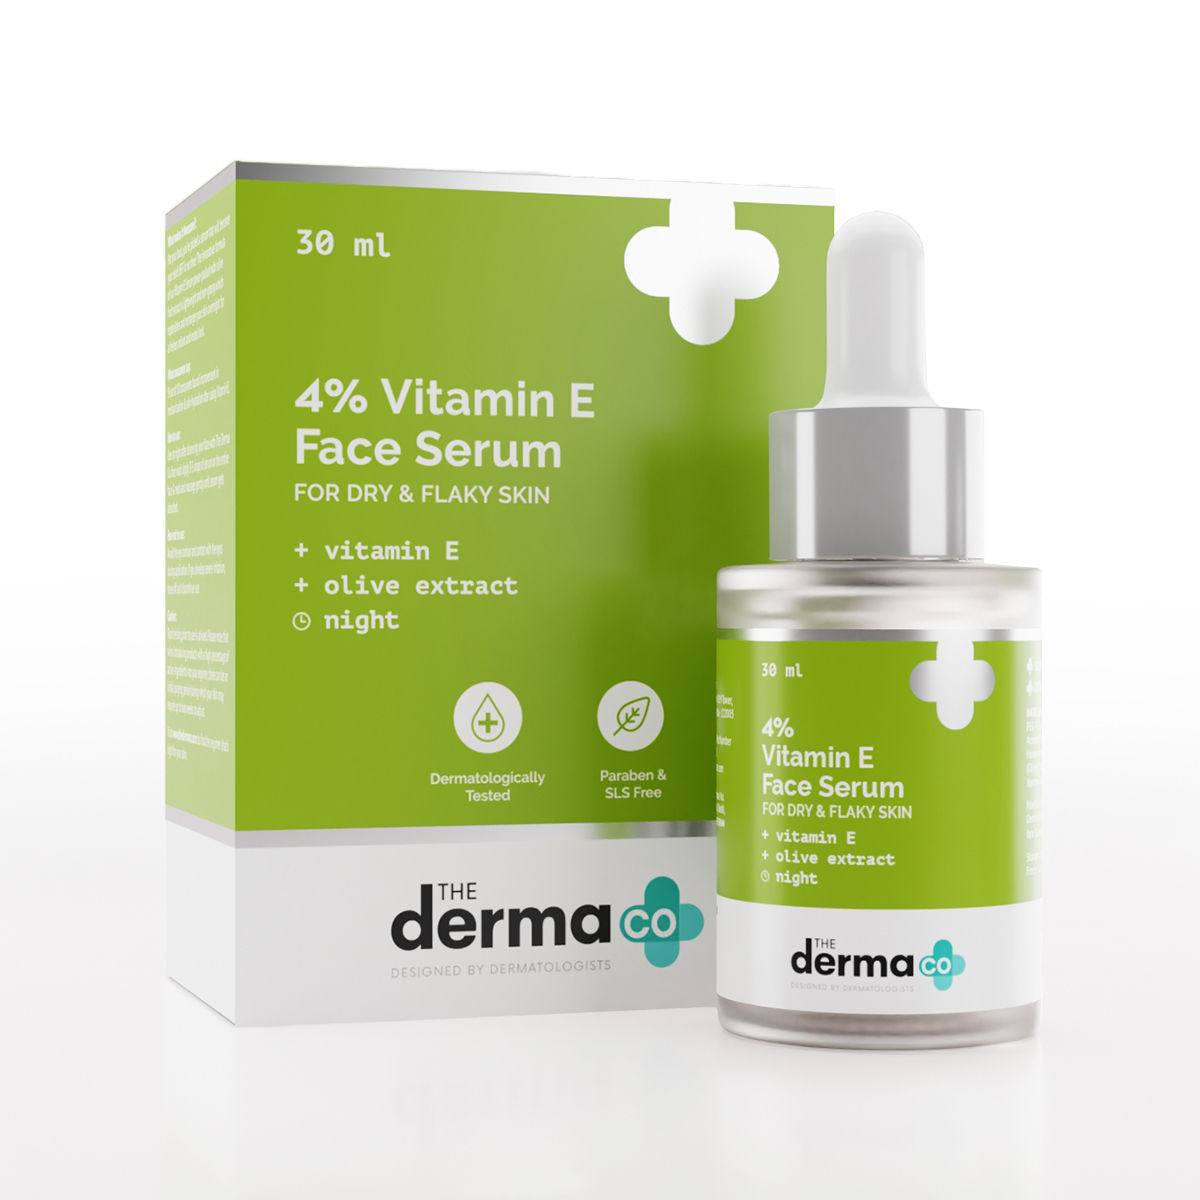 Buy The Derma Co. 4% Vitamin E Face Serum with Vitamin E and Olive Extract for Dry & Flaky Skin - 30 ml - Purplle